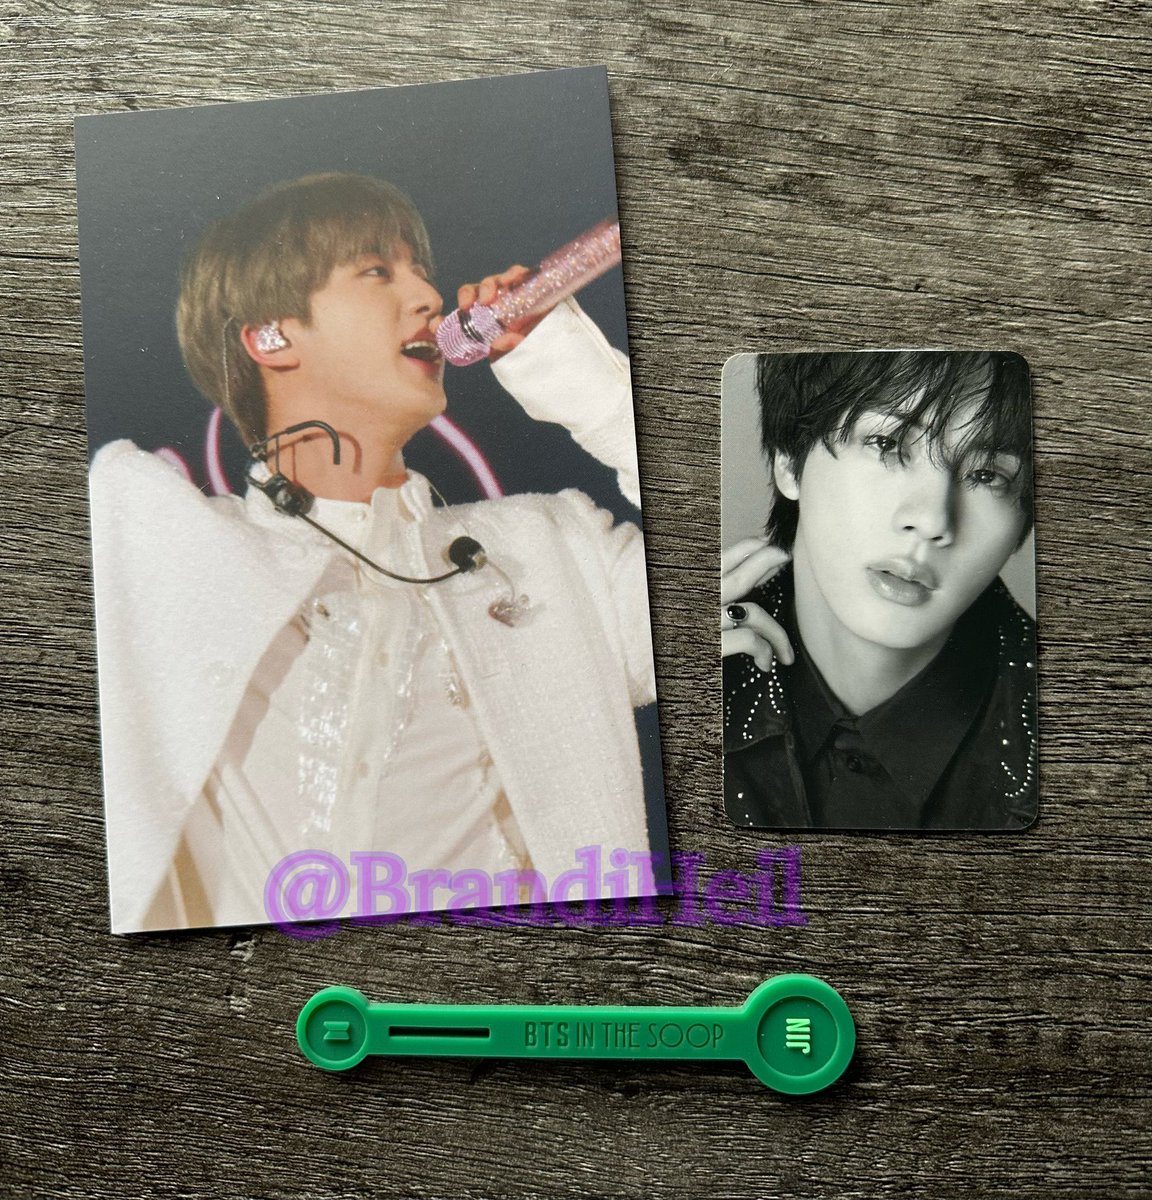 ❄️JIN PACK GA❄️ ❄️MBF ❄️RT/Like ❄️1 winner-US/WW ❄️1 entry per person ❄️Sent by stamped mail ❄️Official Break the Silence postcard, Dicon PC, ITS cup marker ❄️Post your country & fave song of Jin ❄️Ends 1/10 12PM CST #BTS #BTSGIVEAWAY